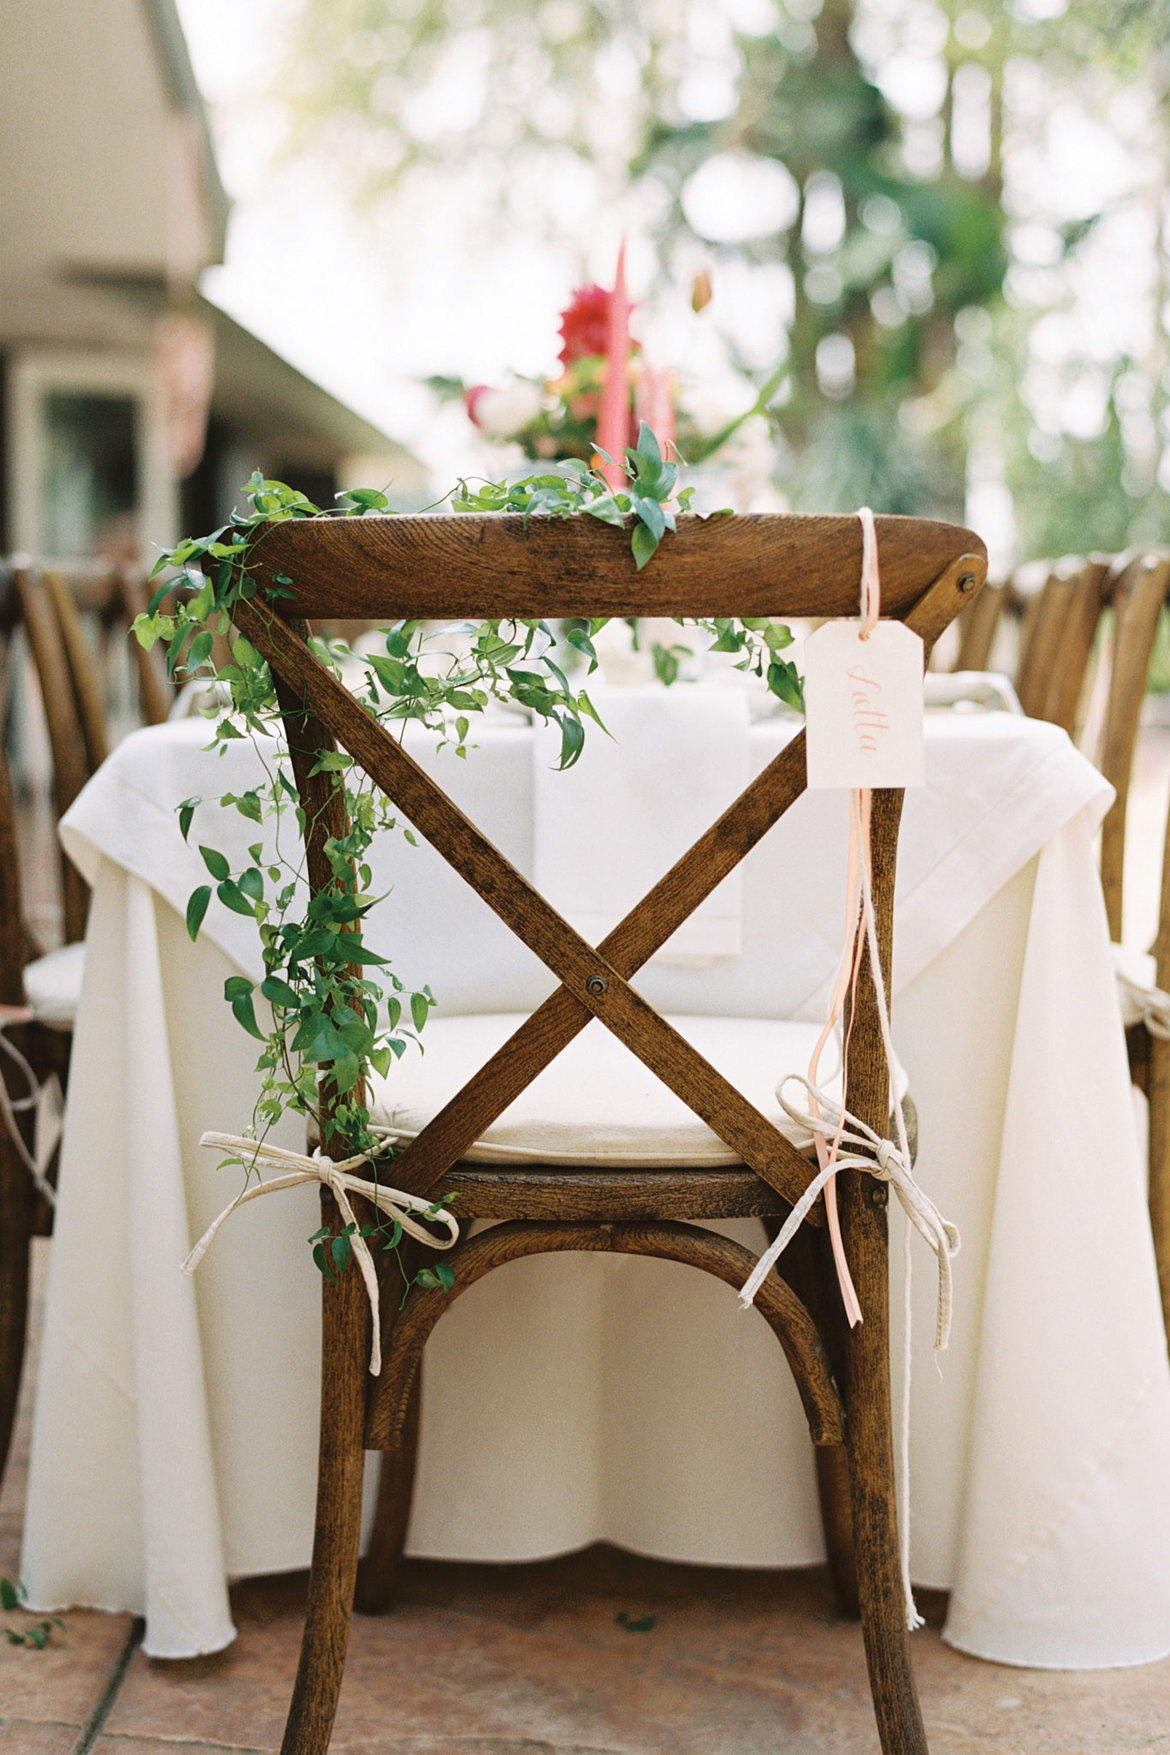 Decorate the chairs with delicate greenery garlands, ribbons and tags, so you won't need any place cards